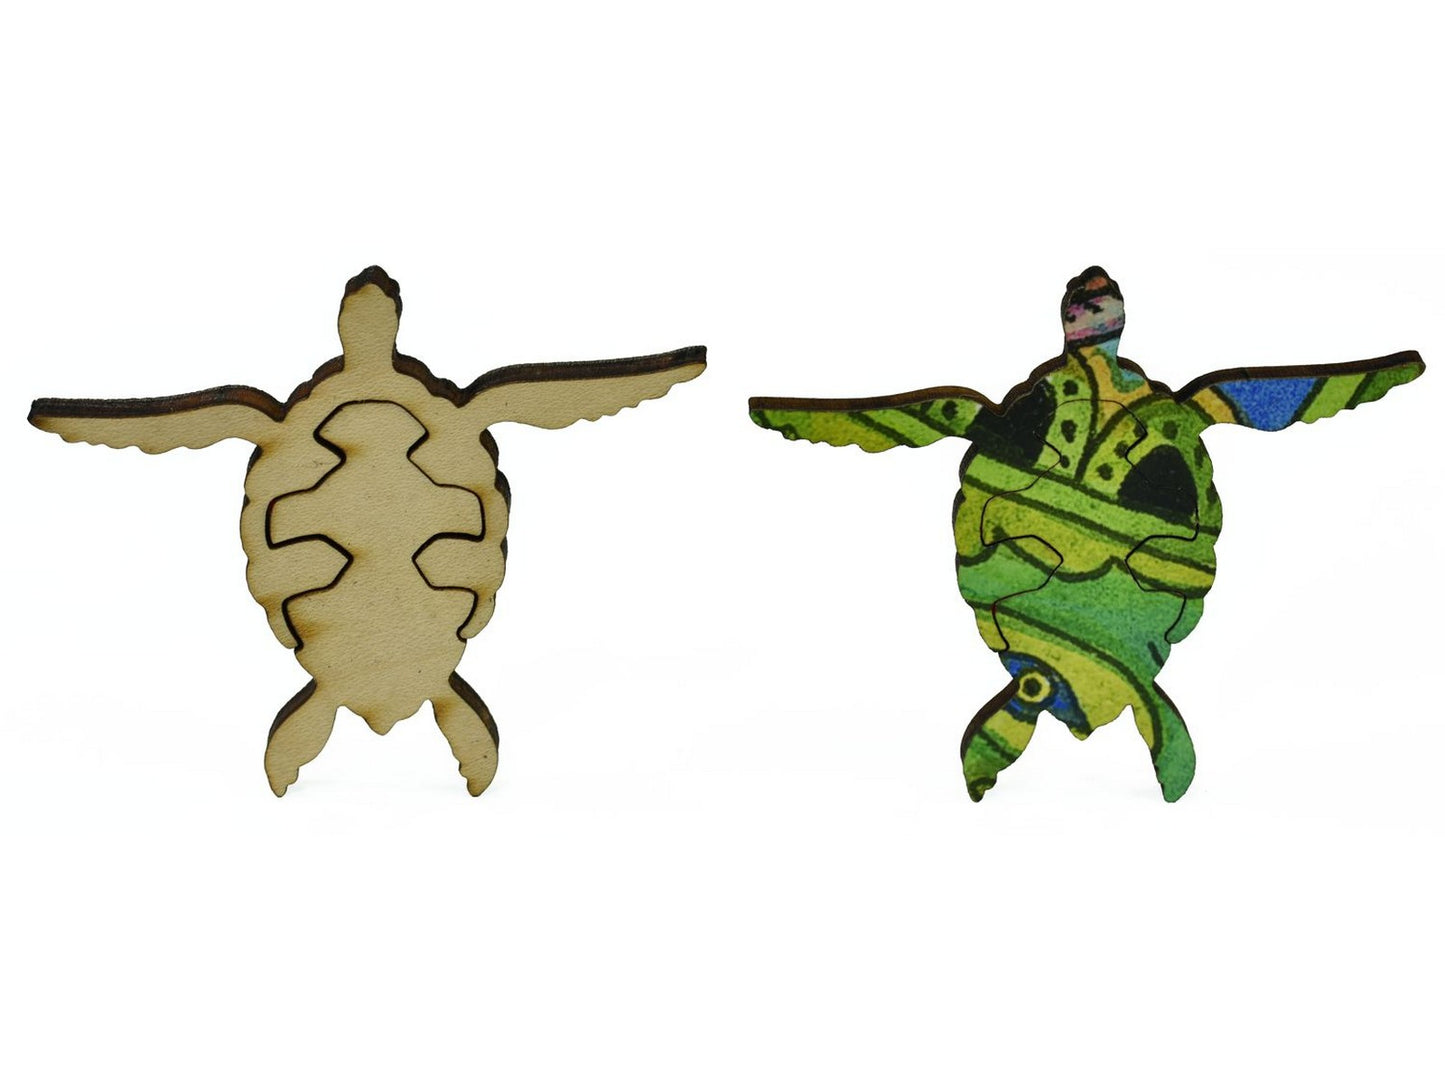 A closeup of pieces in the shape of an additional two sea turtles.